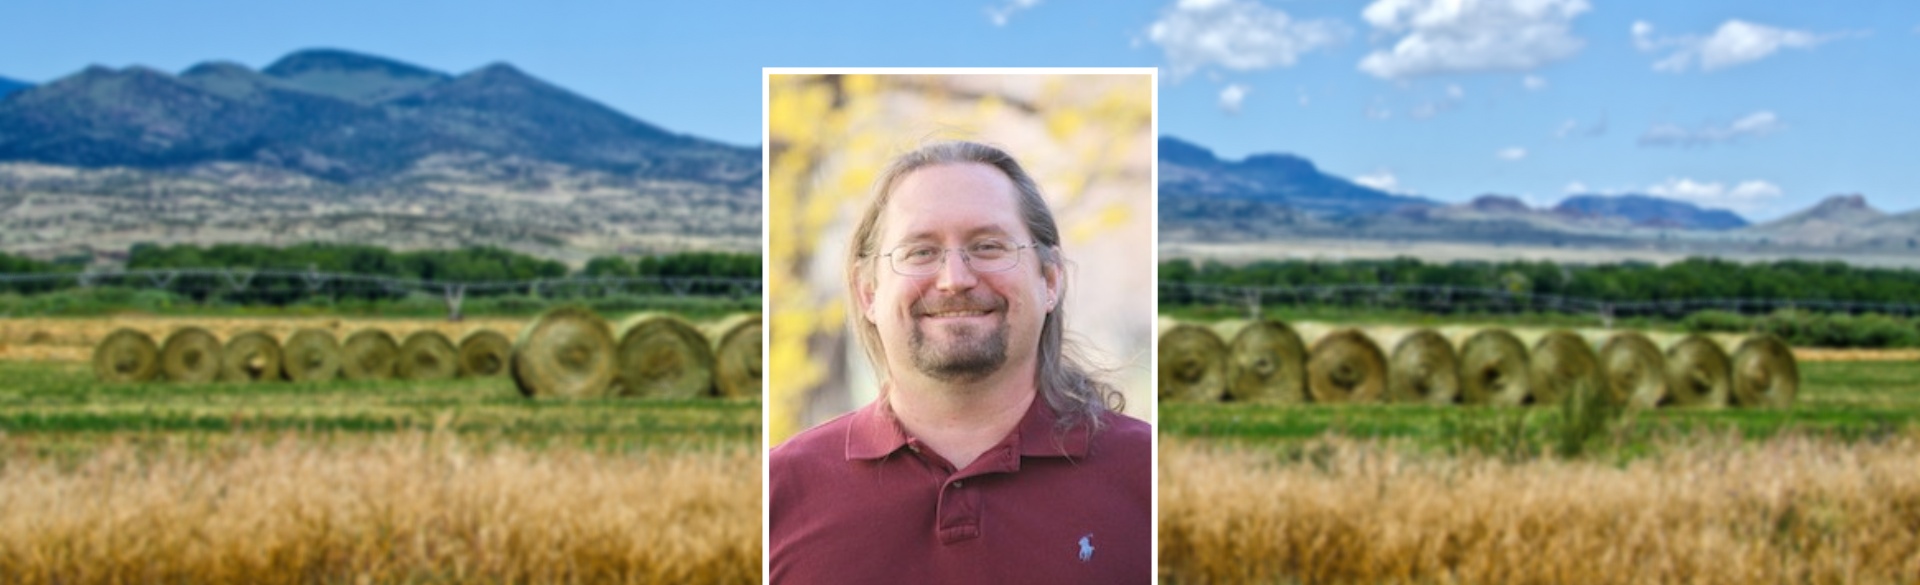 Man smiling in headshot on background of Colorado mountains